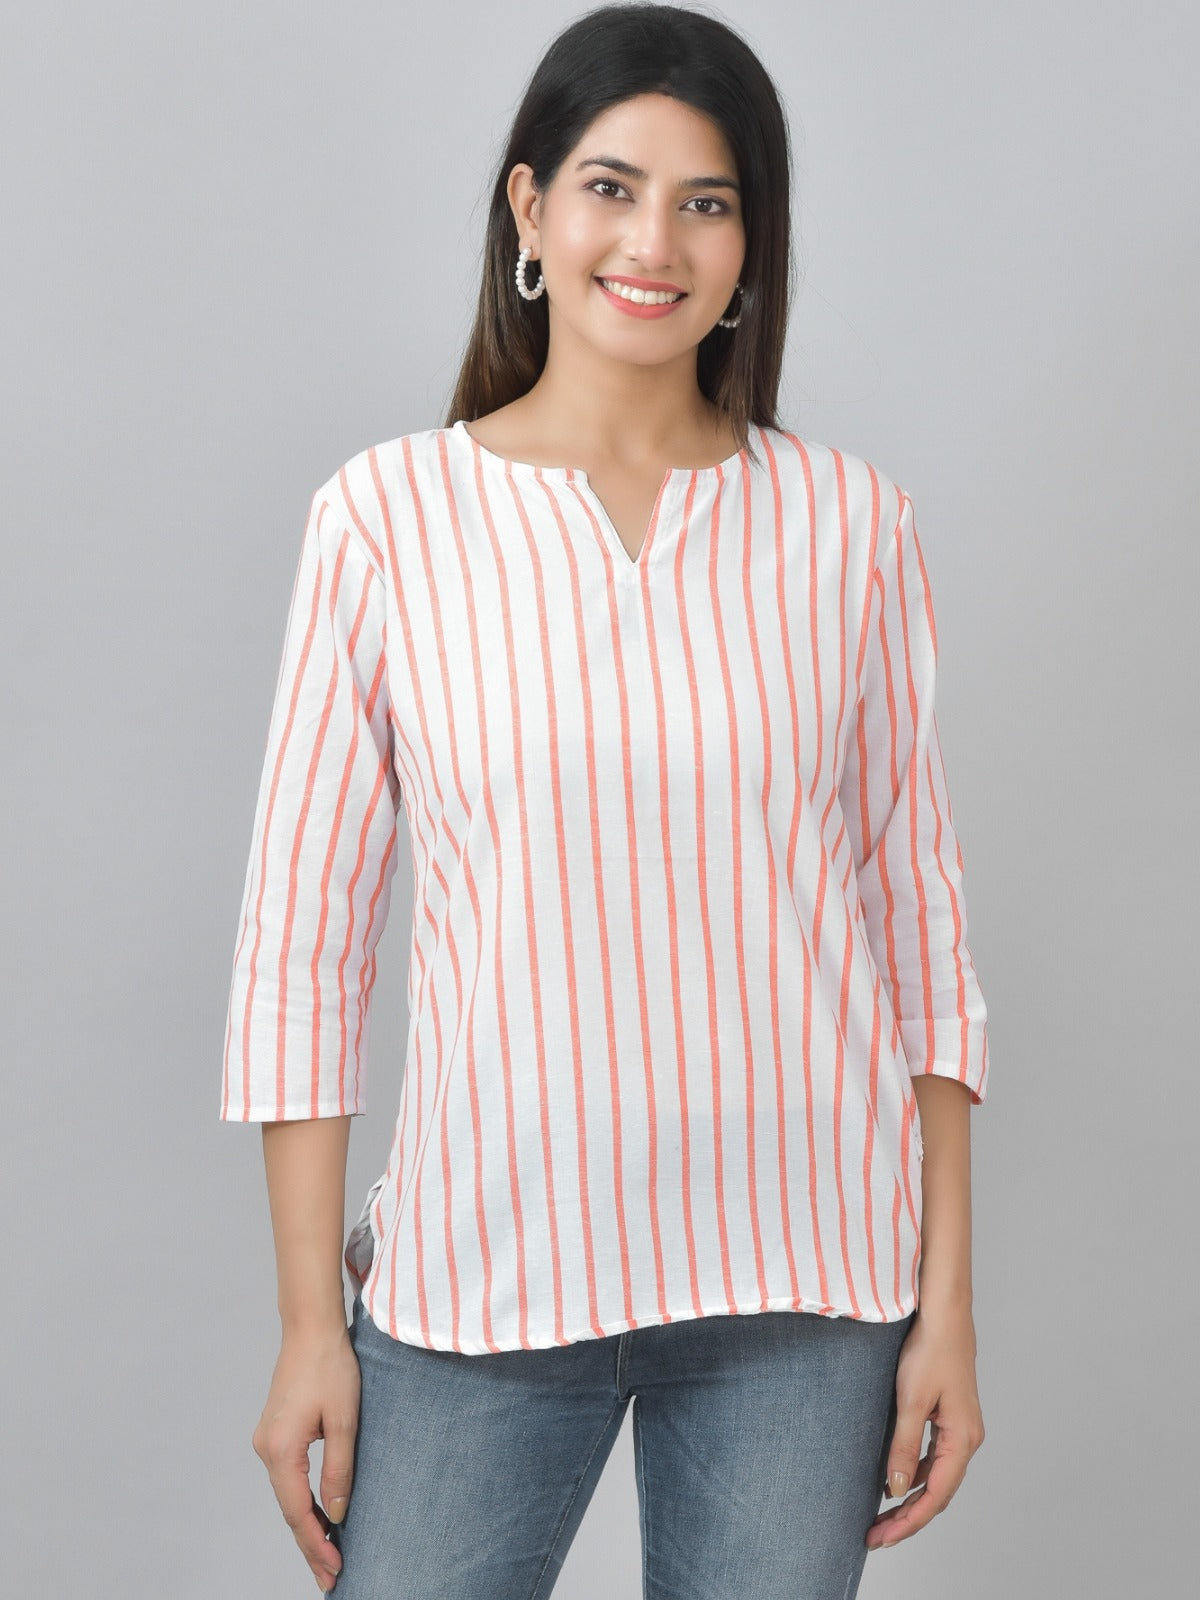 Pack Of 2 Dark Blue And Orange Striped Cotton Womens Top Combo